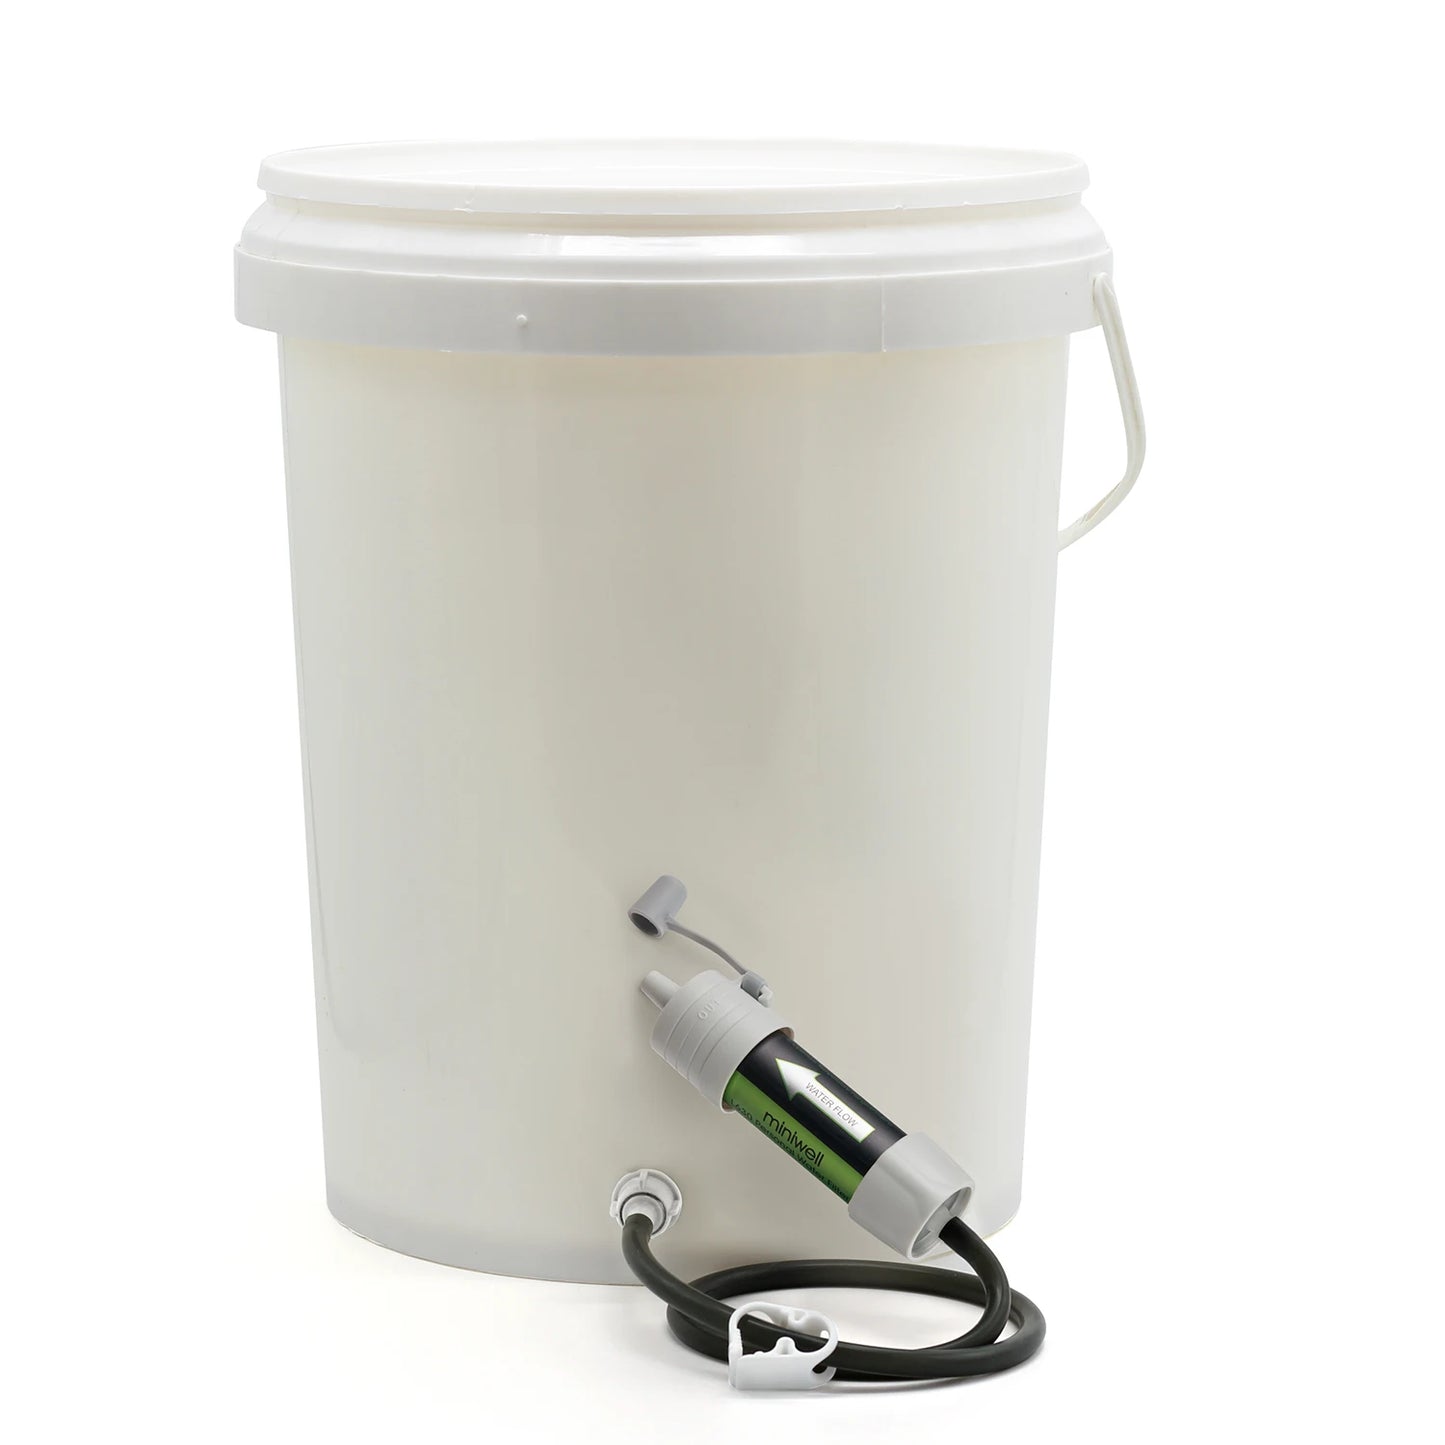 Miniwell L630 Tactical Water Purifier for Survival Kits